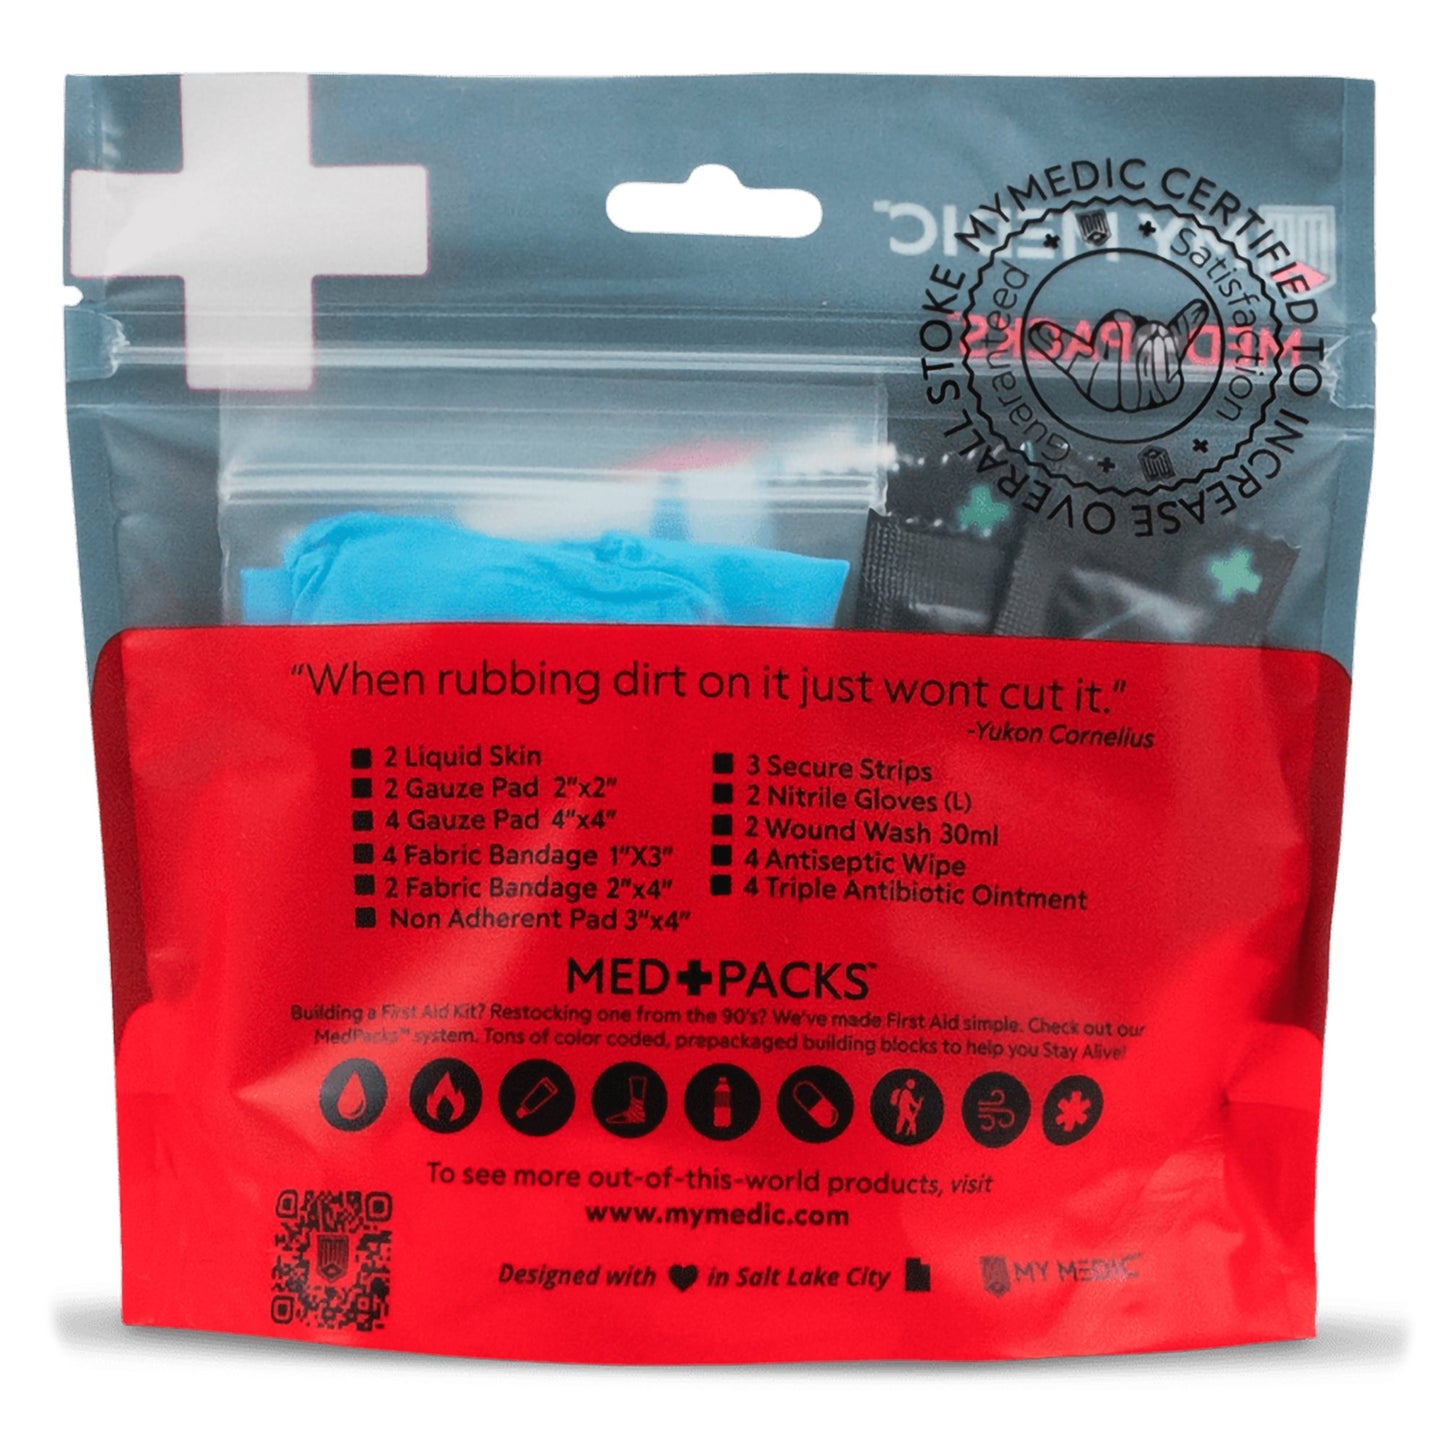 My Medic Med Packs First Aid Kit for Cuts, Scrapes - Emergency Supplies in Portable Pouch